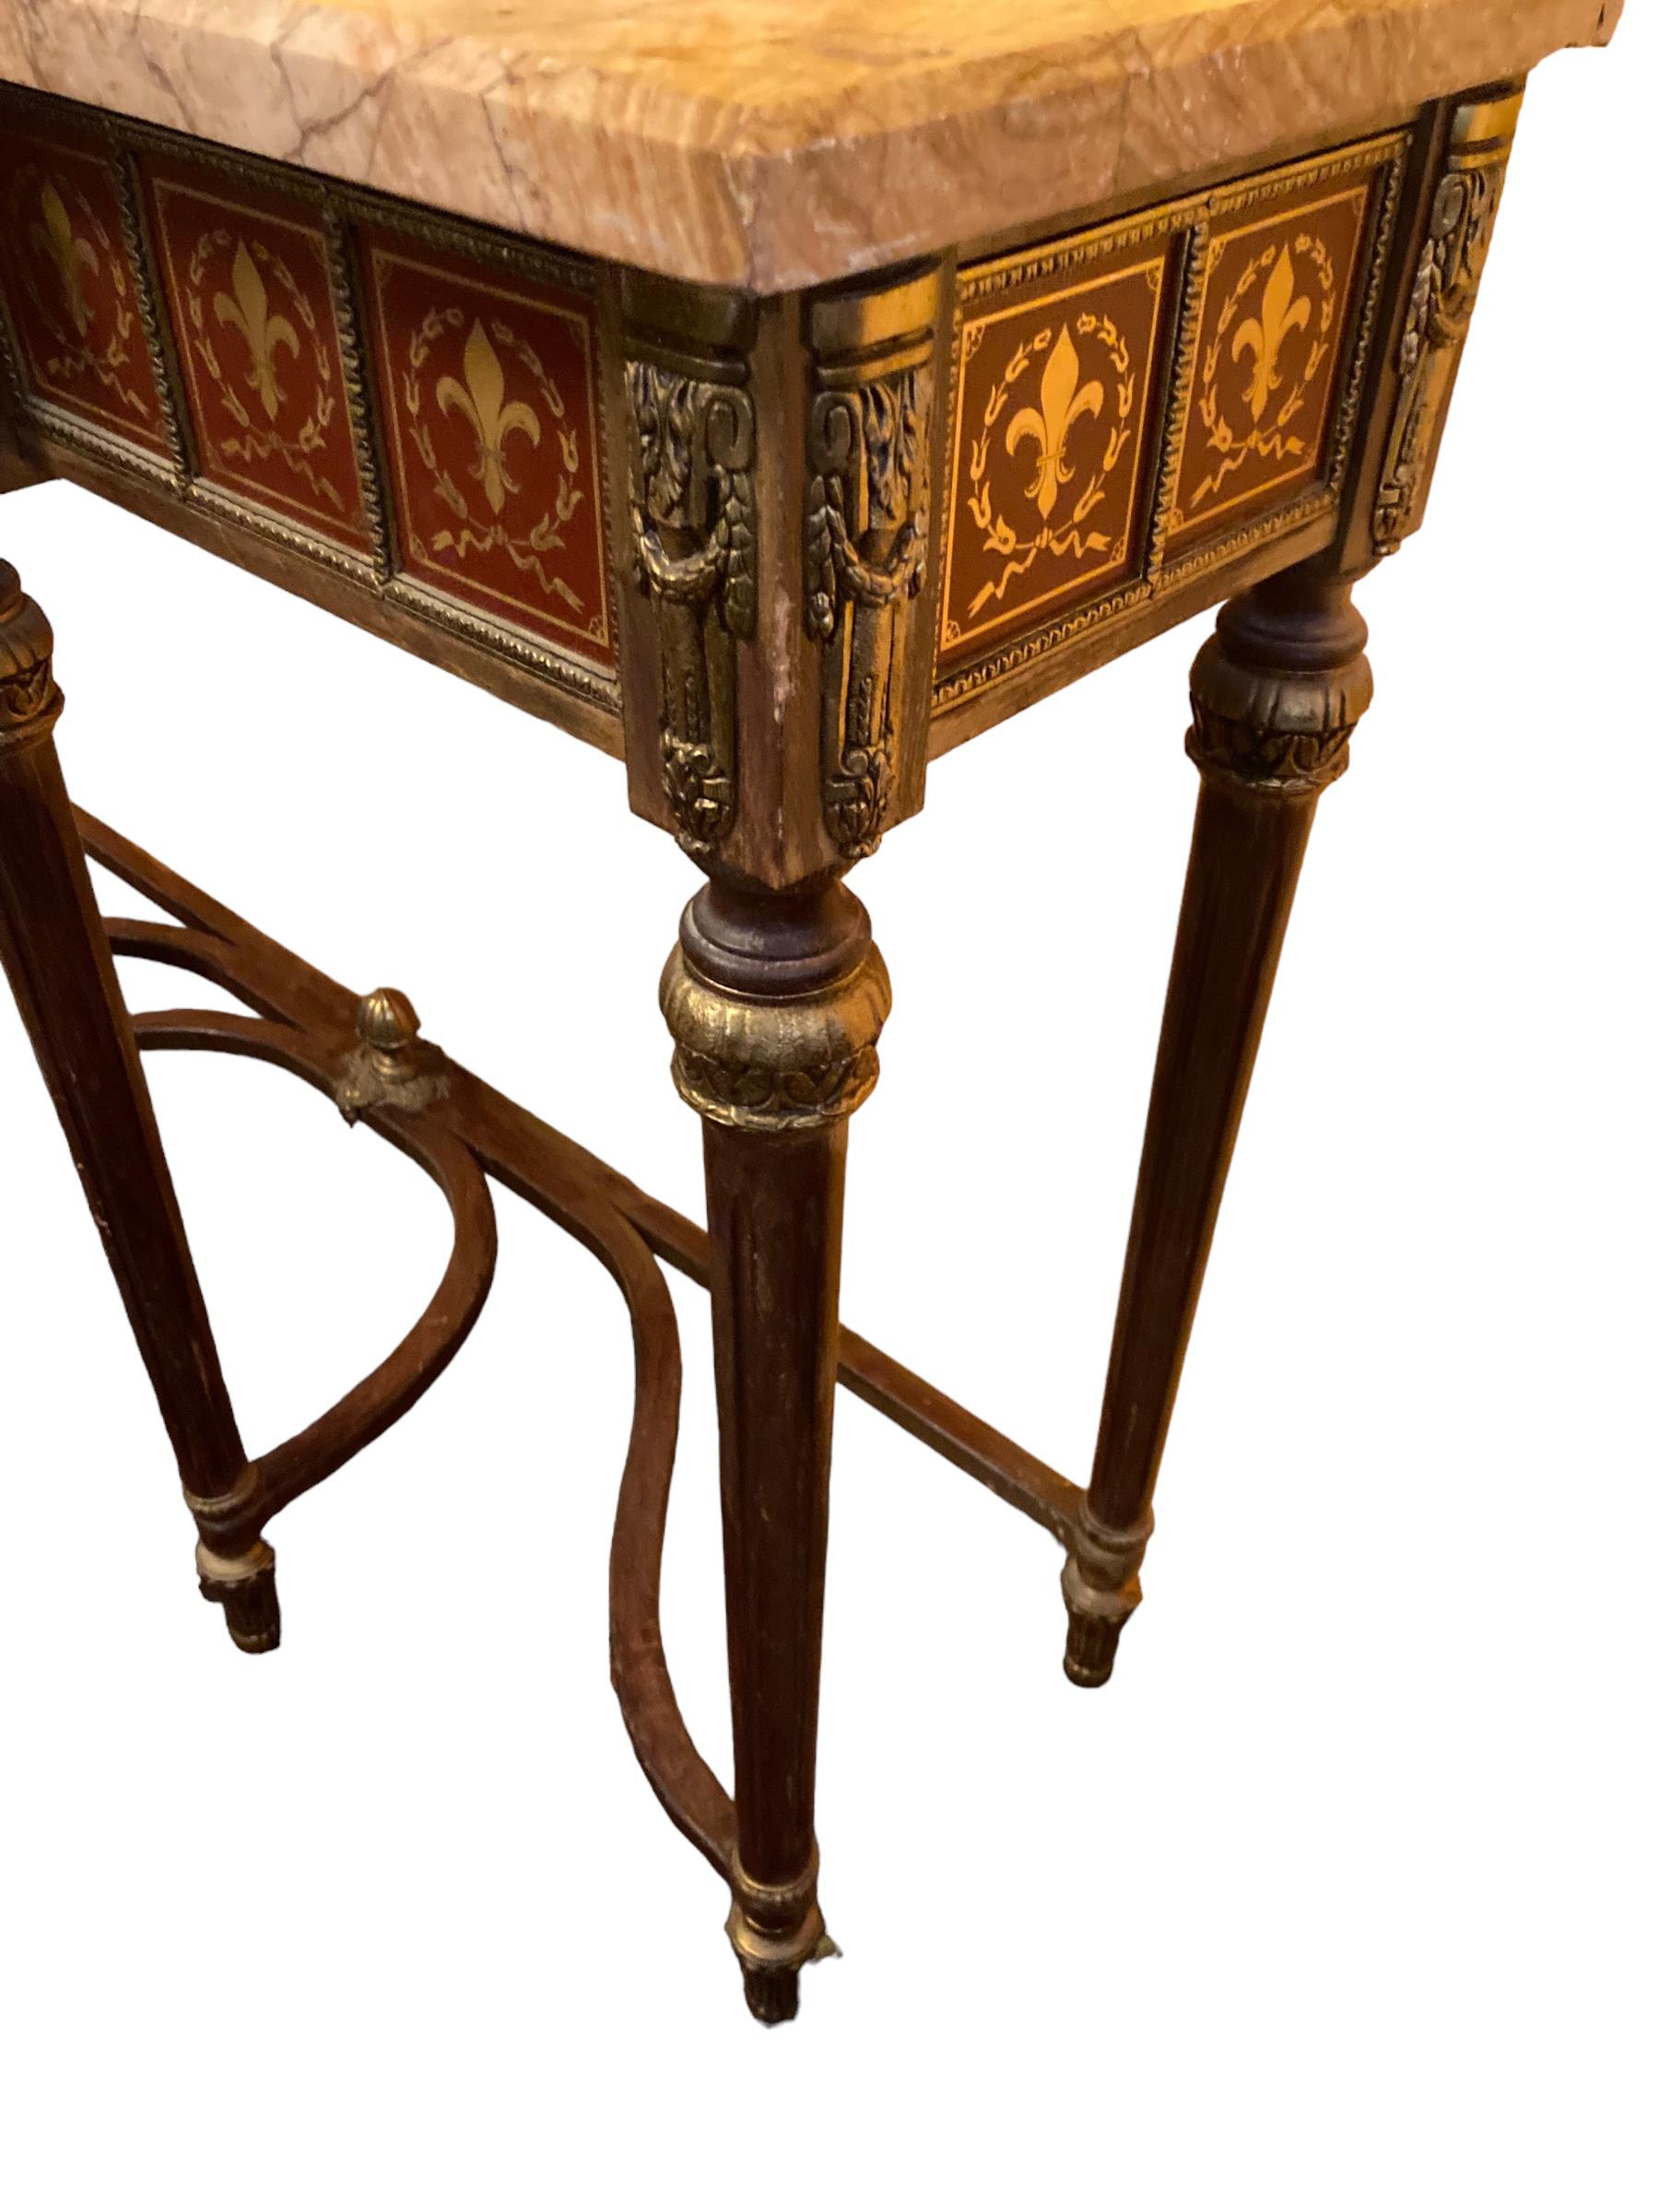 Marquetry Louis XVI Revival Style Console Table by H & L Epstein